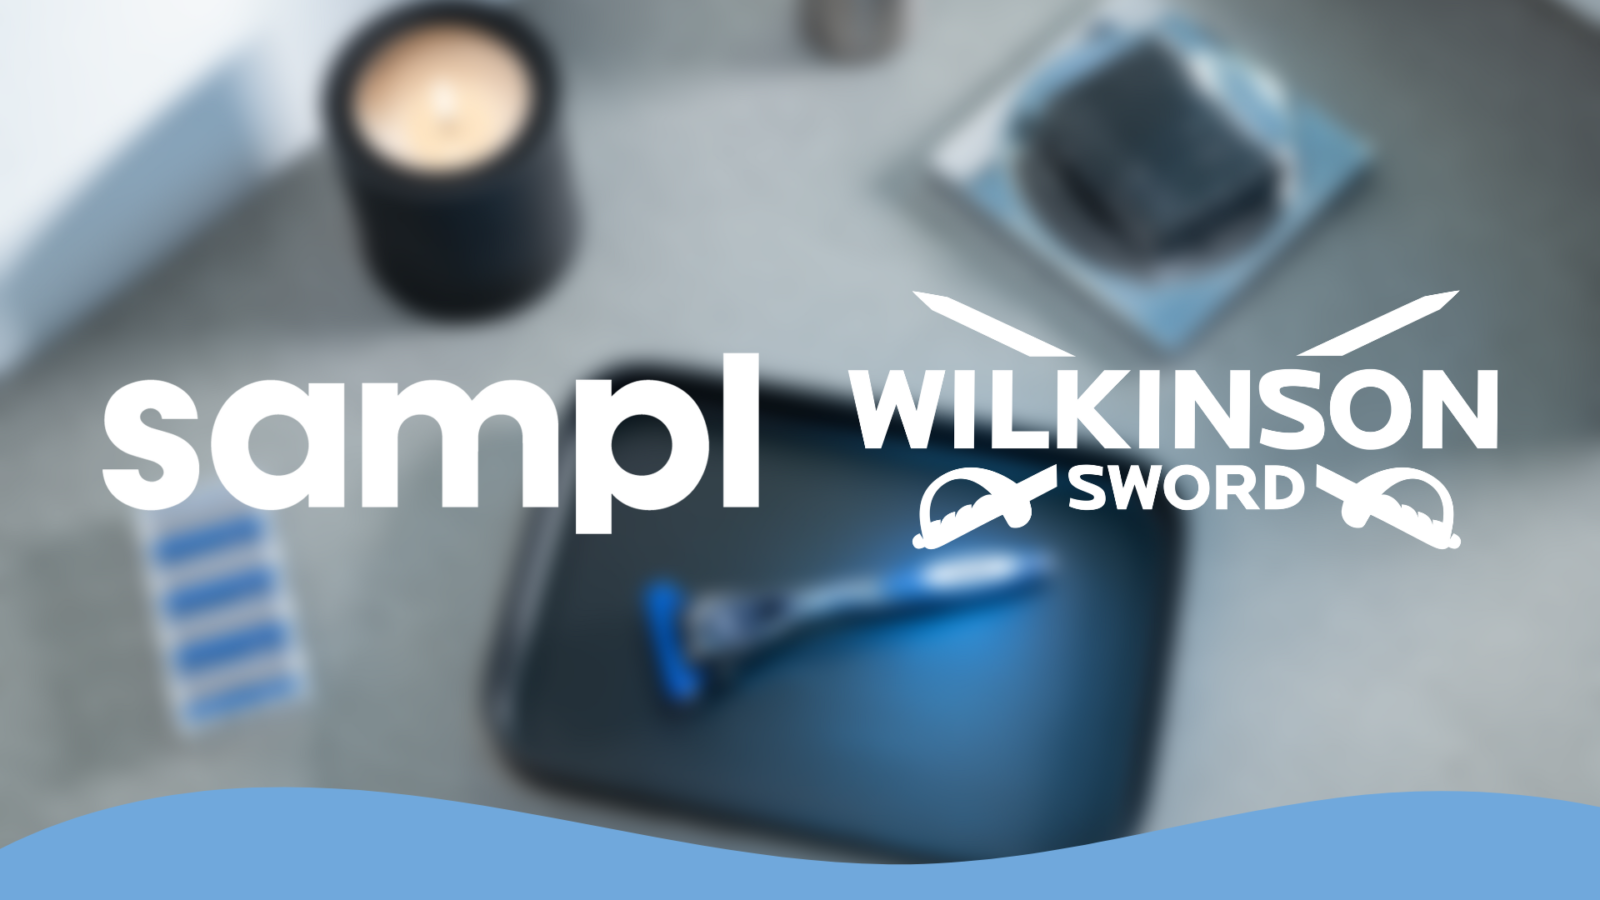 sampl and wilkinson sword logo against blurred backdrop of a razor